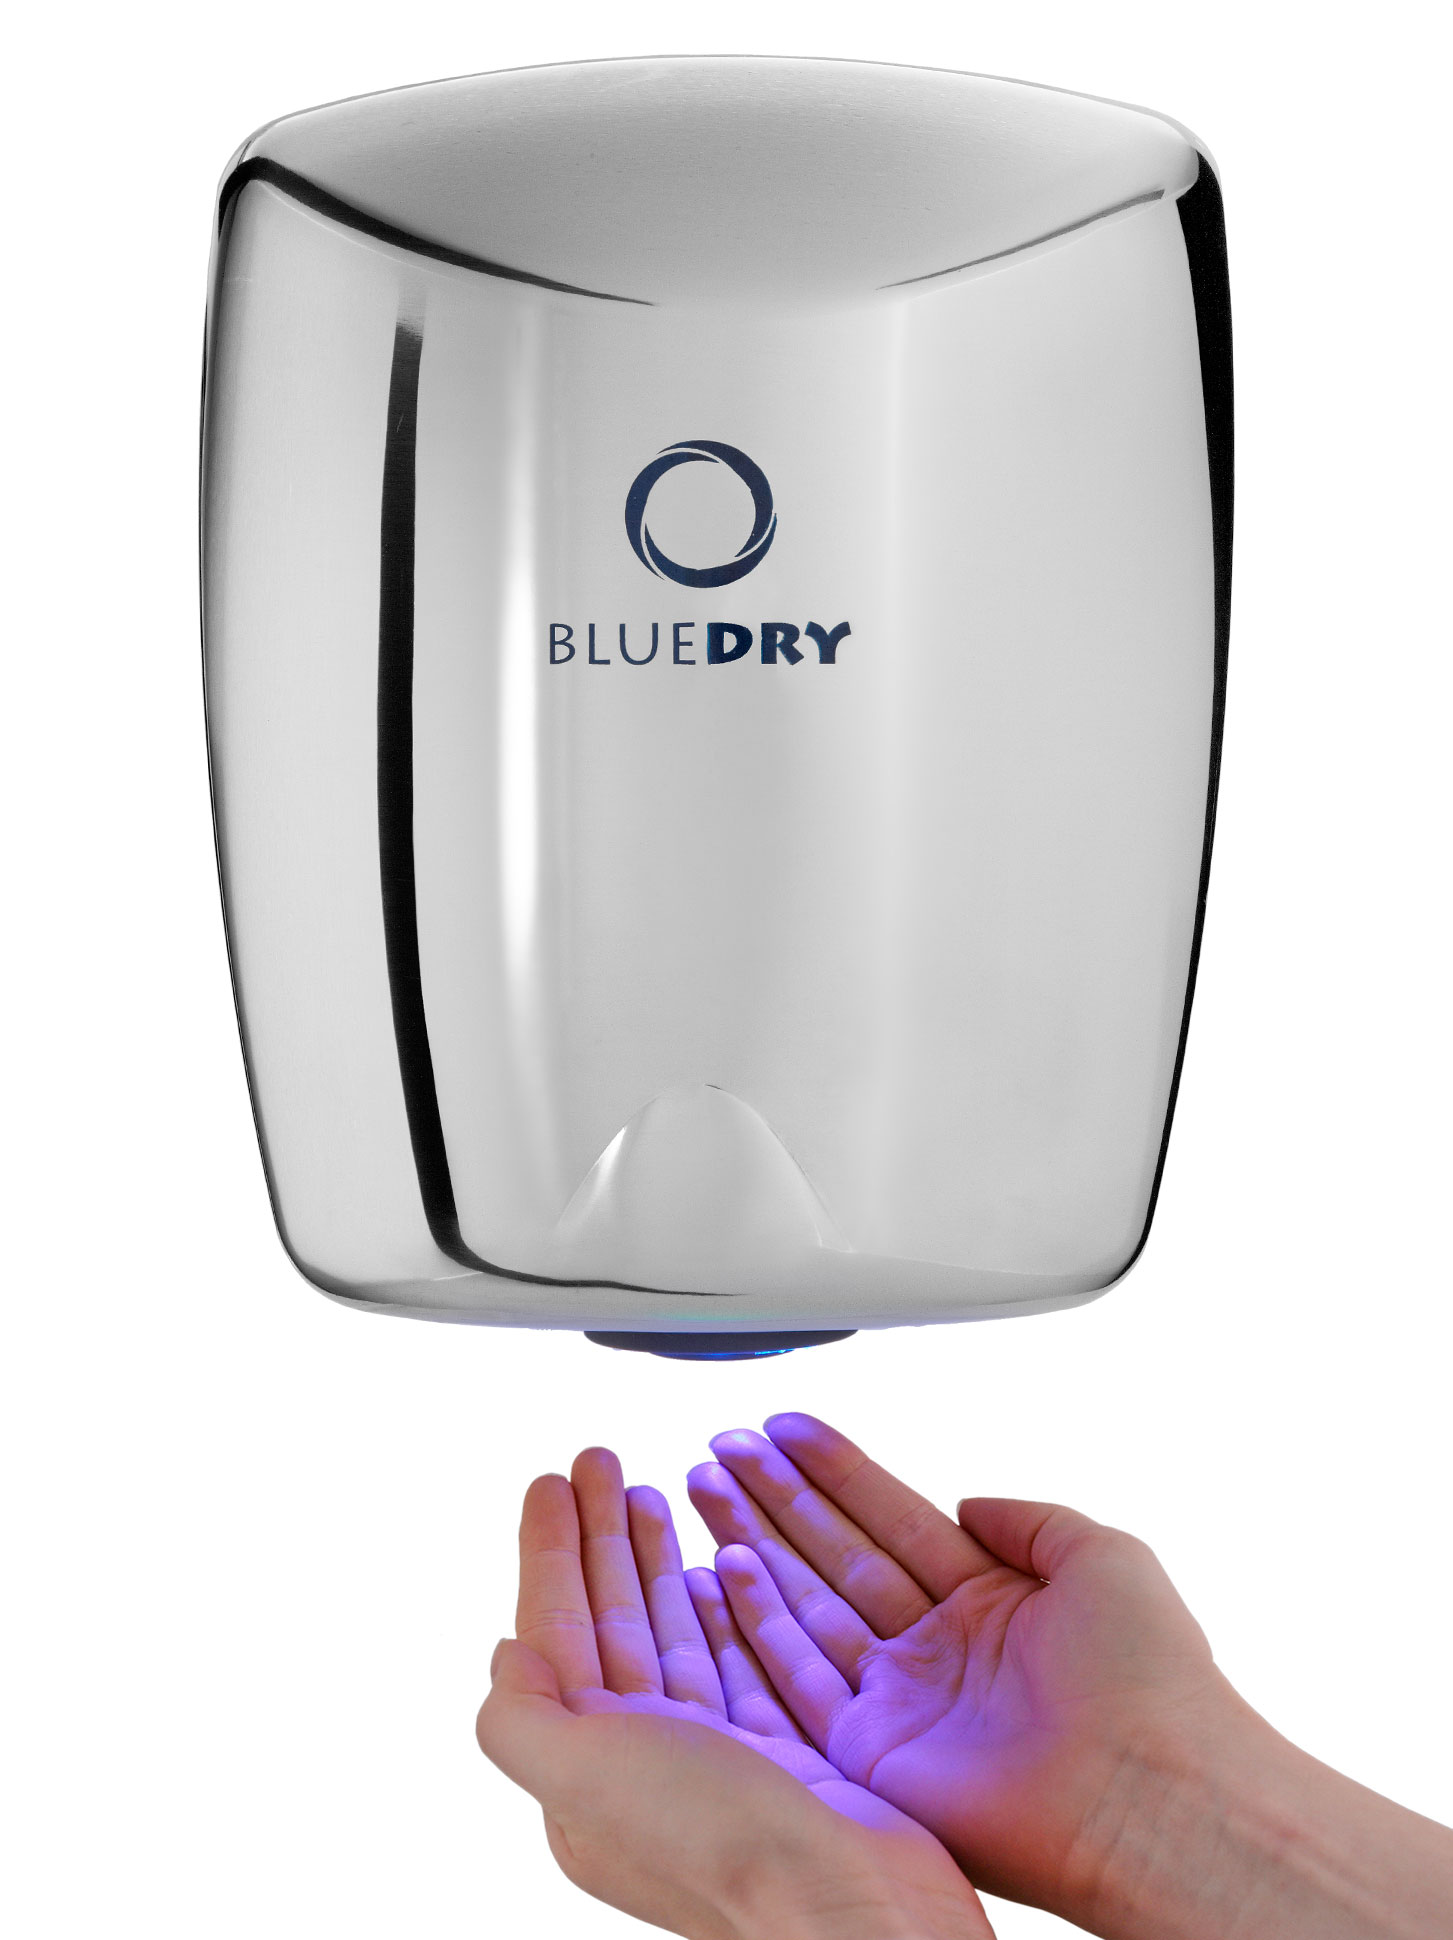 Brushed Steel BLUEDRY Mini Jet High Speed Compact Electric Hand Dryer 